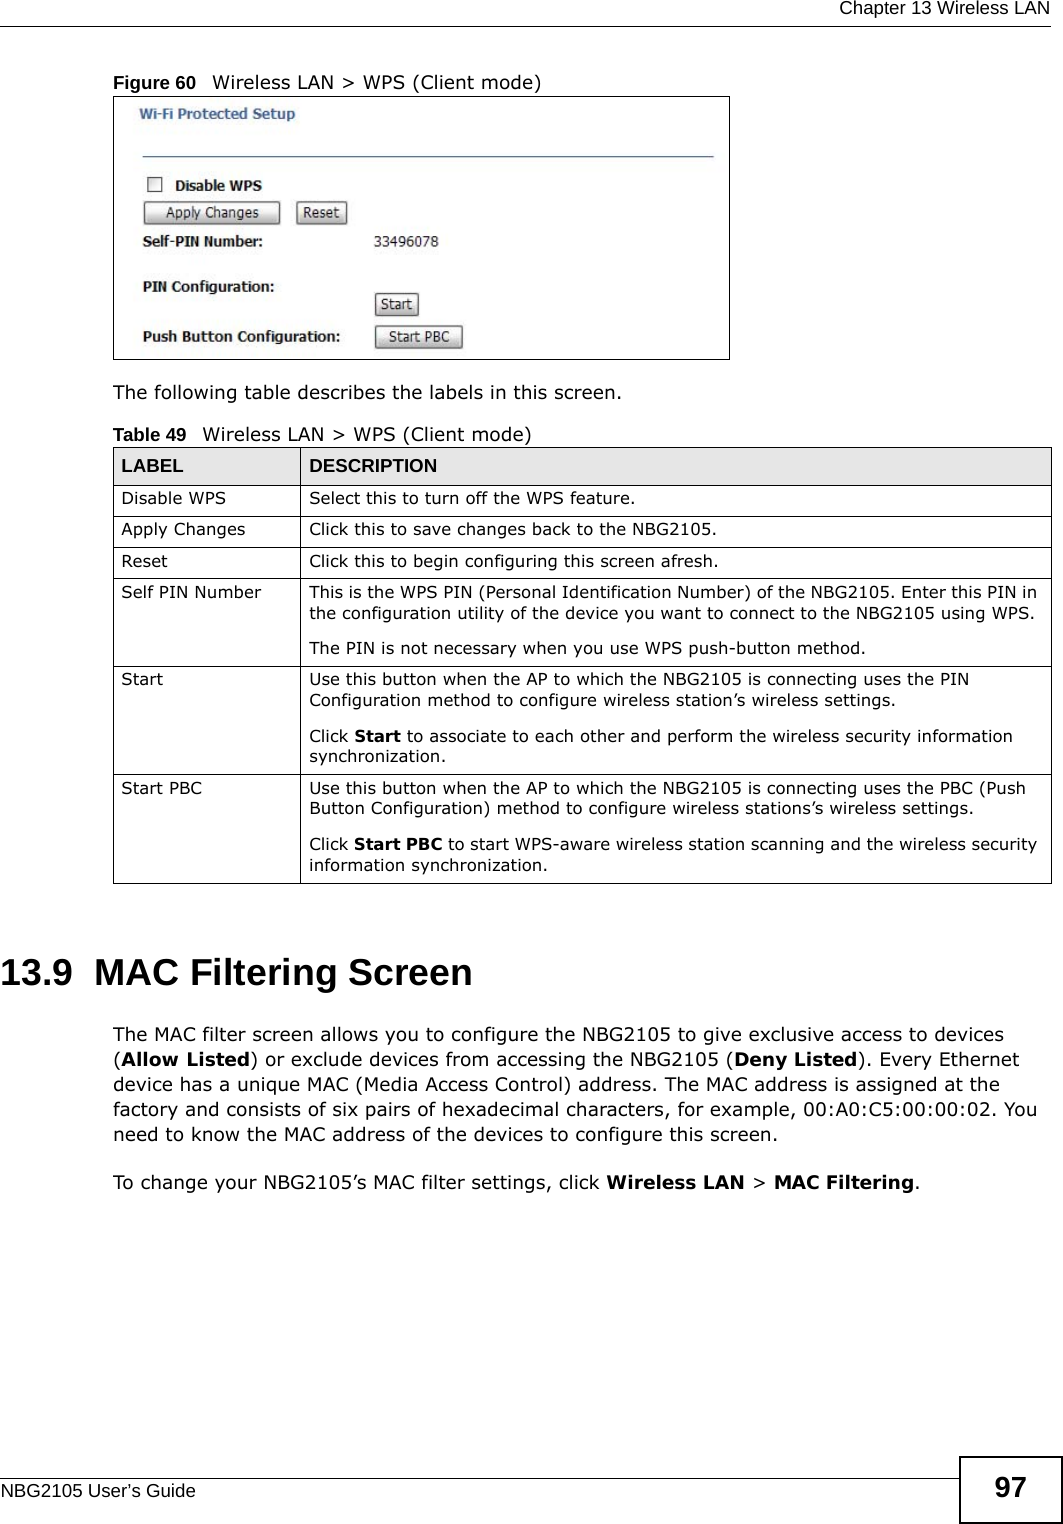  Chapter 13 Wireless LANNBG2105 User’s Guide 97Figure 60   Wireless LAN &gt; WPS (Client mode) The following table describes the labels in this screen.13.9  MAC Filtering ScreenThe MAC filter screen allows you to configure the NBG2105 to give exclusive access to devices (Allow Listed) or exclude devices from accessing the NBG2105 (Deny Listed). Every Ethernet device has a unique MAC (Media Access Control) address. The MAC address is assigned at the factory and consists of six pairs of hexadecimal characters, for example, 00:A0:C5:00:00:02. You need to know the MAC address of the devices to configure this screen.To change your NBG2105’s MAC filter settings, click Wireless LAN &gt; MAC Filtering.Table 49   Wireless LAN &gt; WPS (Client mode)LABEL DESCRIPTIONDisable WPS Select this to turn off the WPS feature.Apply Changes Click this to save changes back to the NBG2105.Reset Click this to begin configuring this screen afresh.Self PIN Number This is the WPS PIN (Personal Identification Number) of the NBG2105. Enter this PIN in the configuration utility of the device you want to connect to the NBG2105 using WPS.The PIN is not necessary when you use WPS push-button method.Start Use this button when the AP to which the NBG2105 is connecting uses the PIN Configuration method to configure wireless station’s wireless settings. Click Start to associate to each other and perform the wireless security information synchronization. Start PBC Use this button when the AP to which the NBG2105 is connecting uses the PBC (Push Button Configuration) method to configure wireless stations’s wireless settings. Click Start PBC to start WPS-aware wireless station scanning and the wireless security information synchronization. 